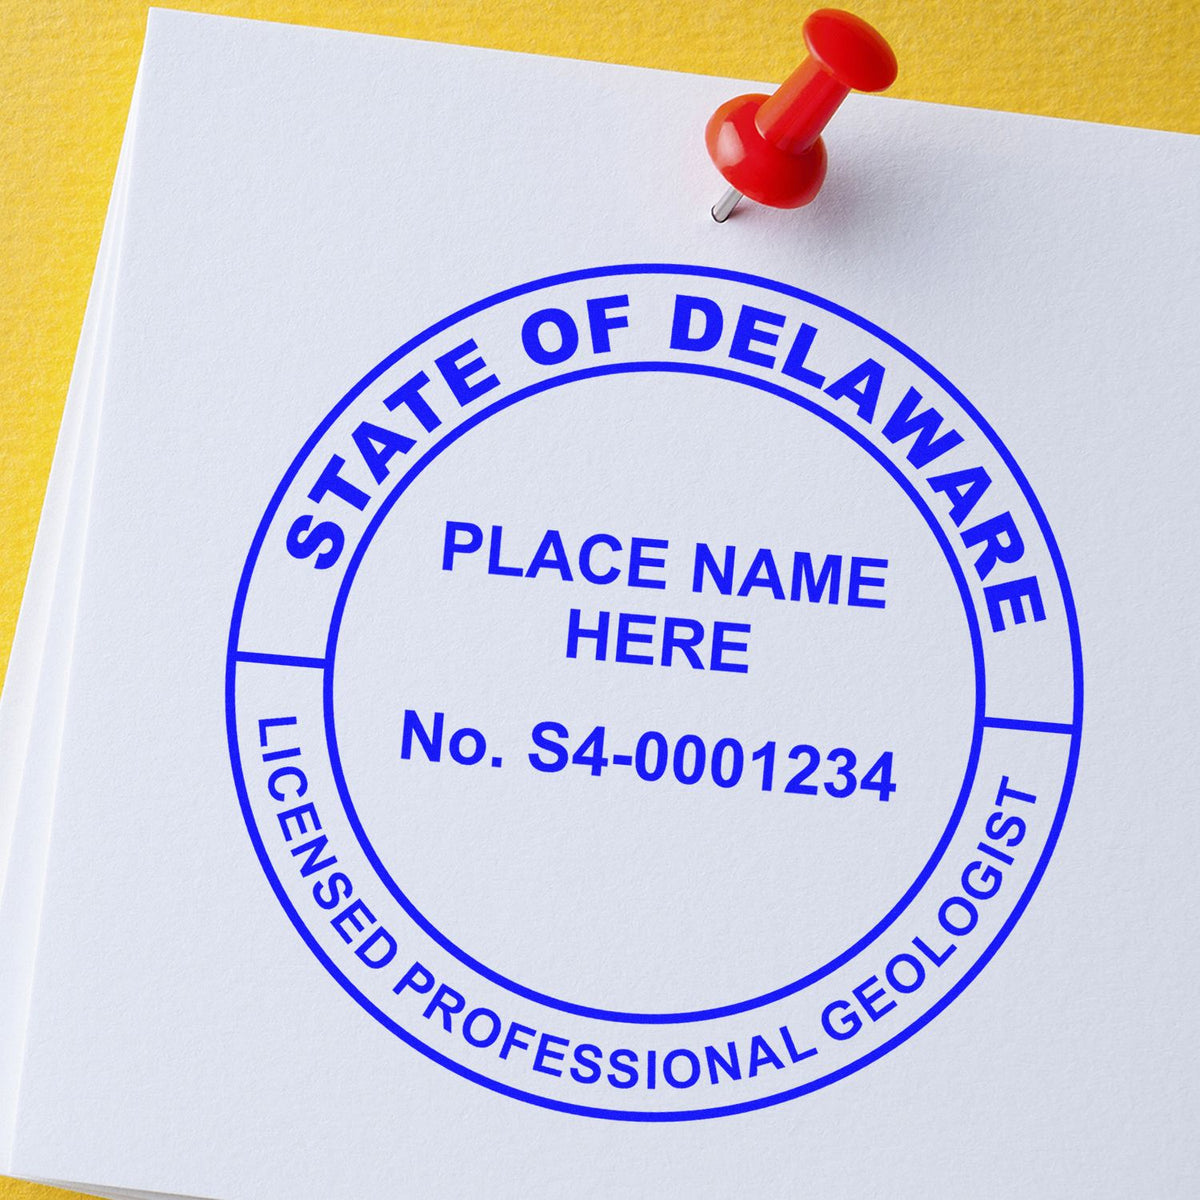 An alternative view of the Delaware Professional Geologist Seal Stamp stamped on a sheet of paper showing the image in use